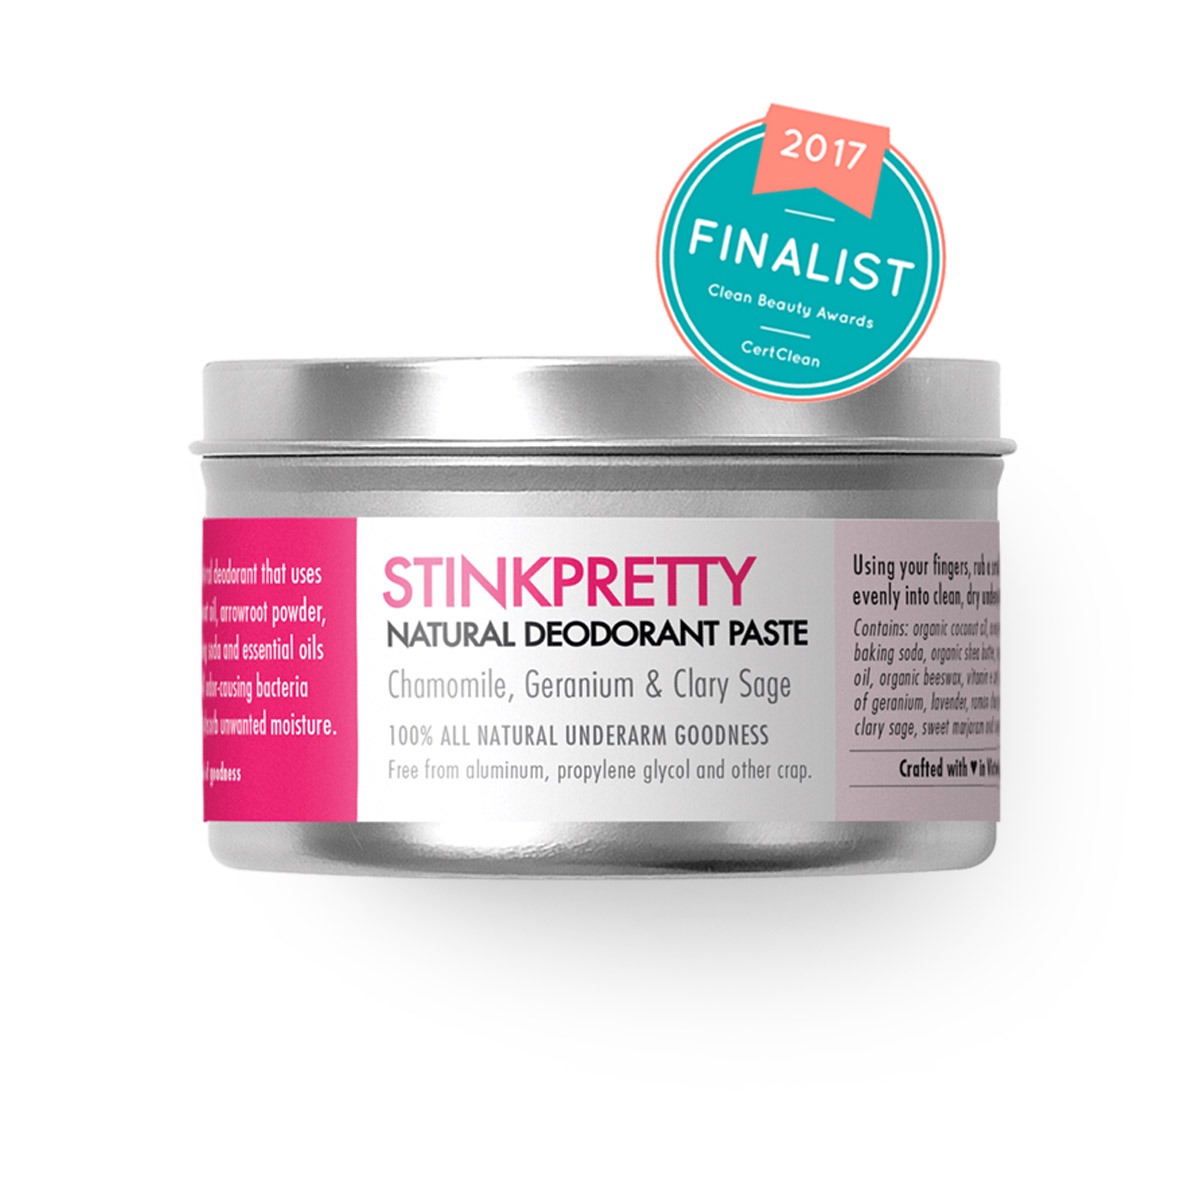 Natural Deodorant with Chamomile, Geranium and Clary Sage - Stinkpretty - Chemical free. Aluminum Free. Paraben Free. Made in Canada.